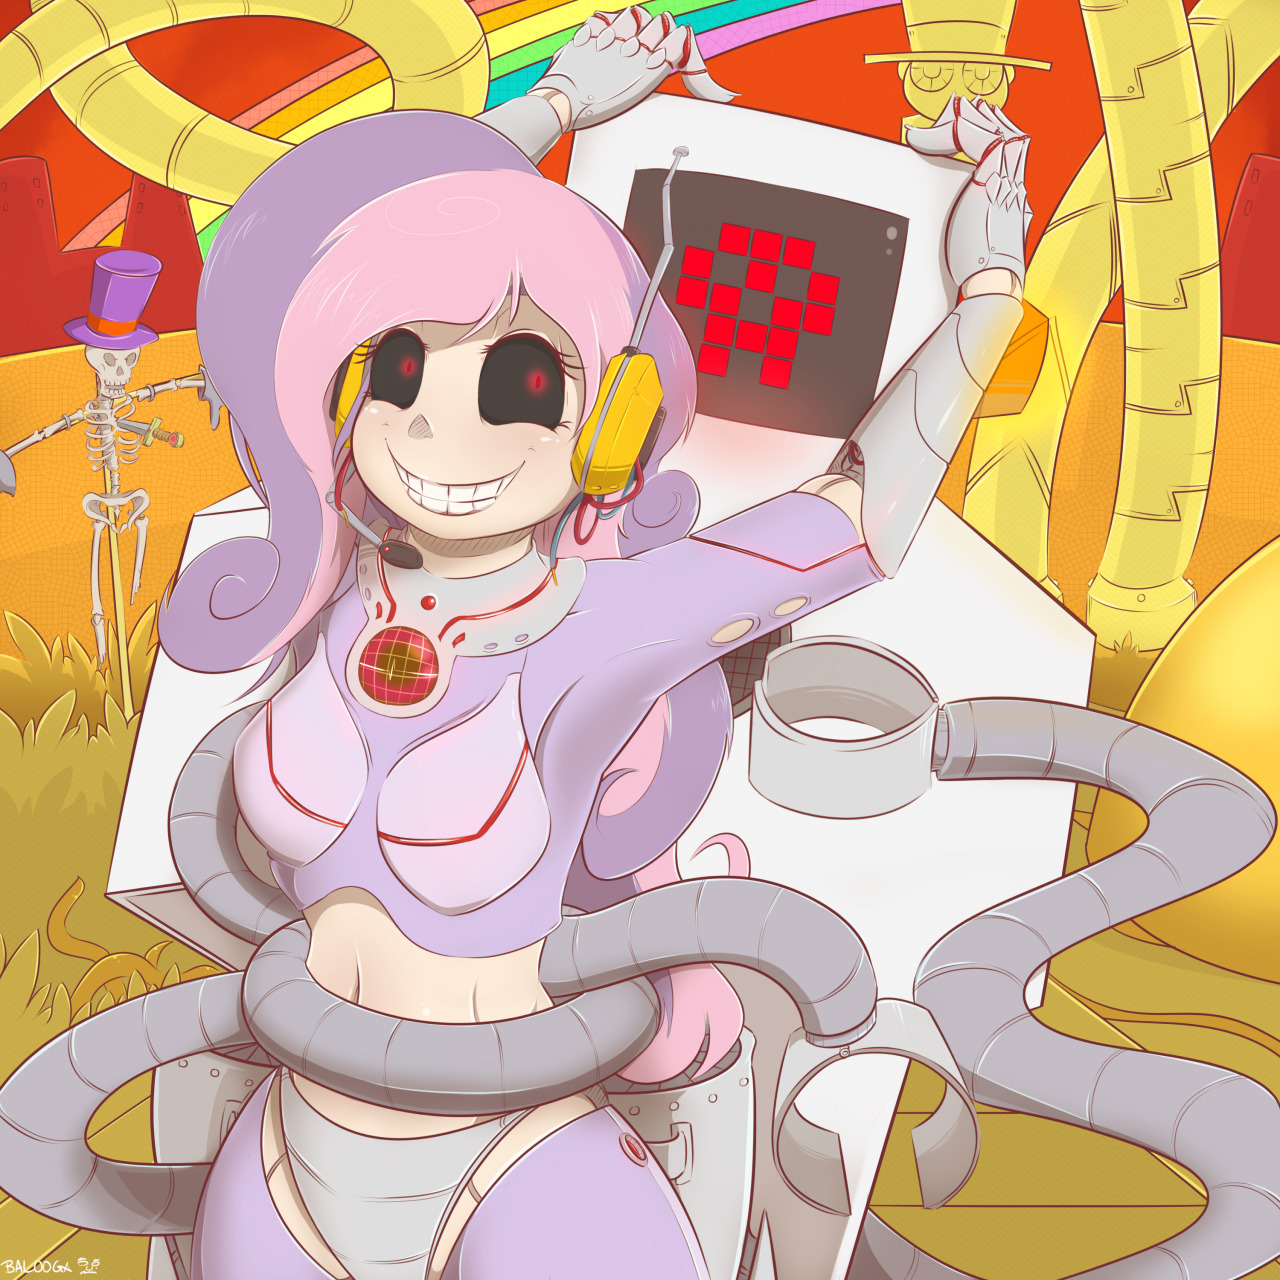 Adult Sweetie Bot x Jailbot. Great ship. And dual versions because.